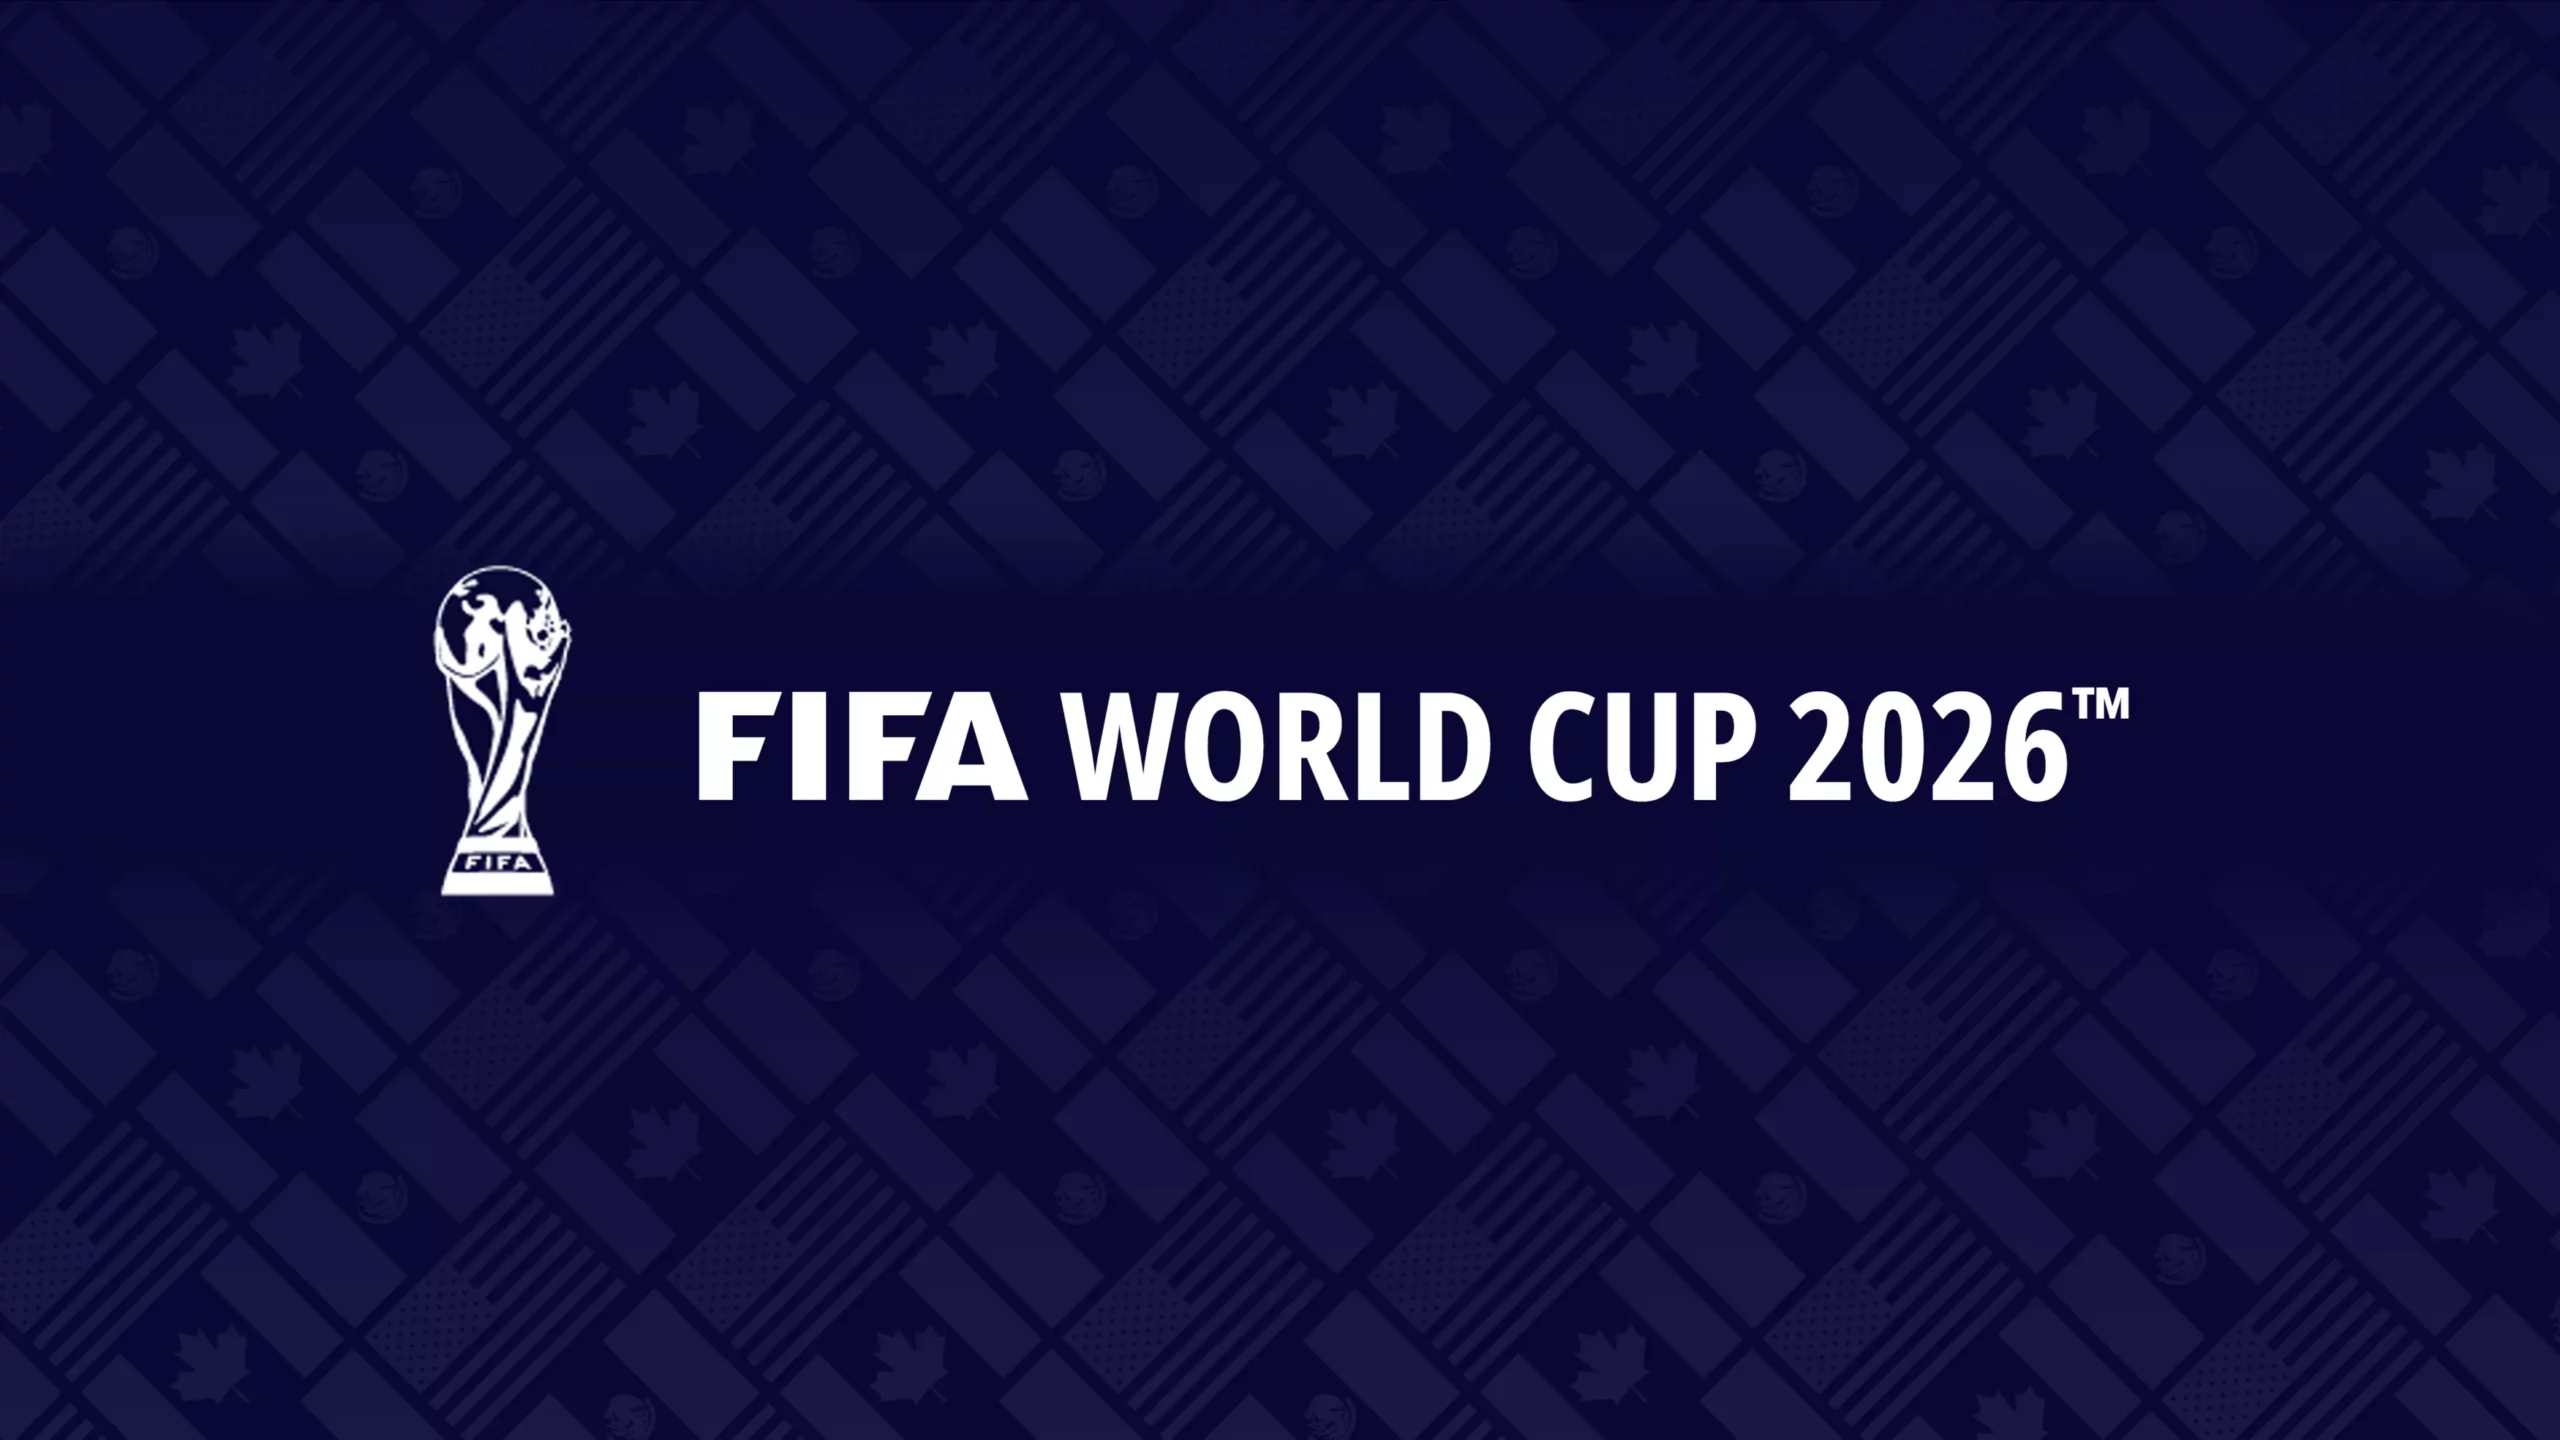 FIFA selects 16 host cities for 2026 World Cup